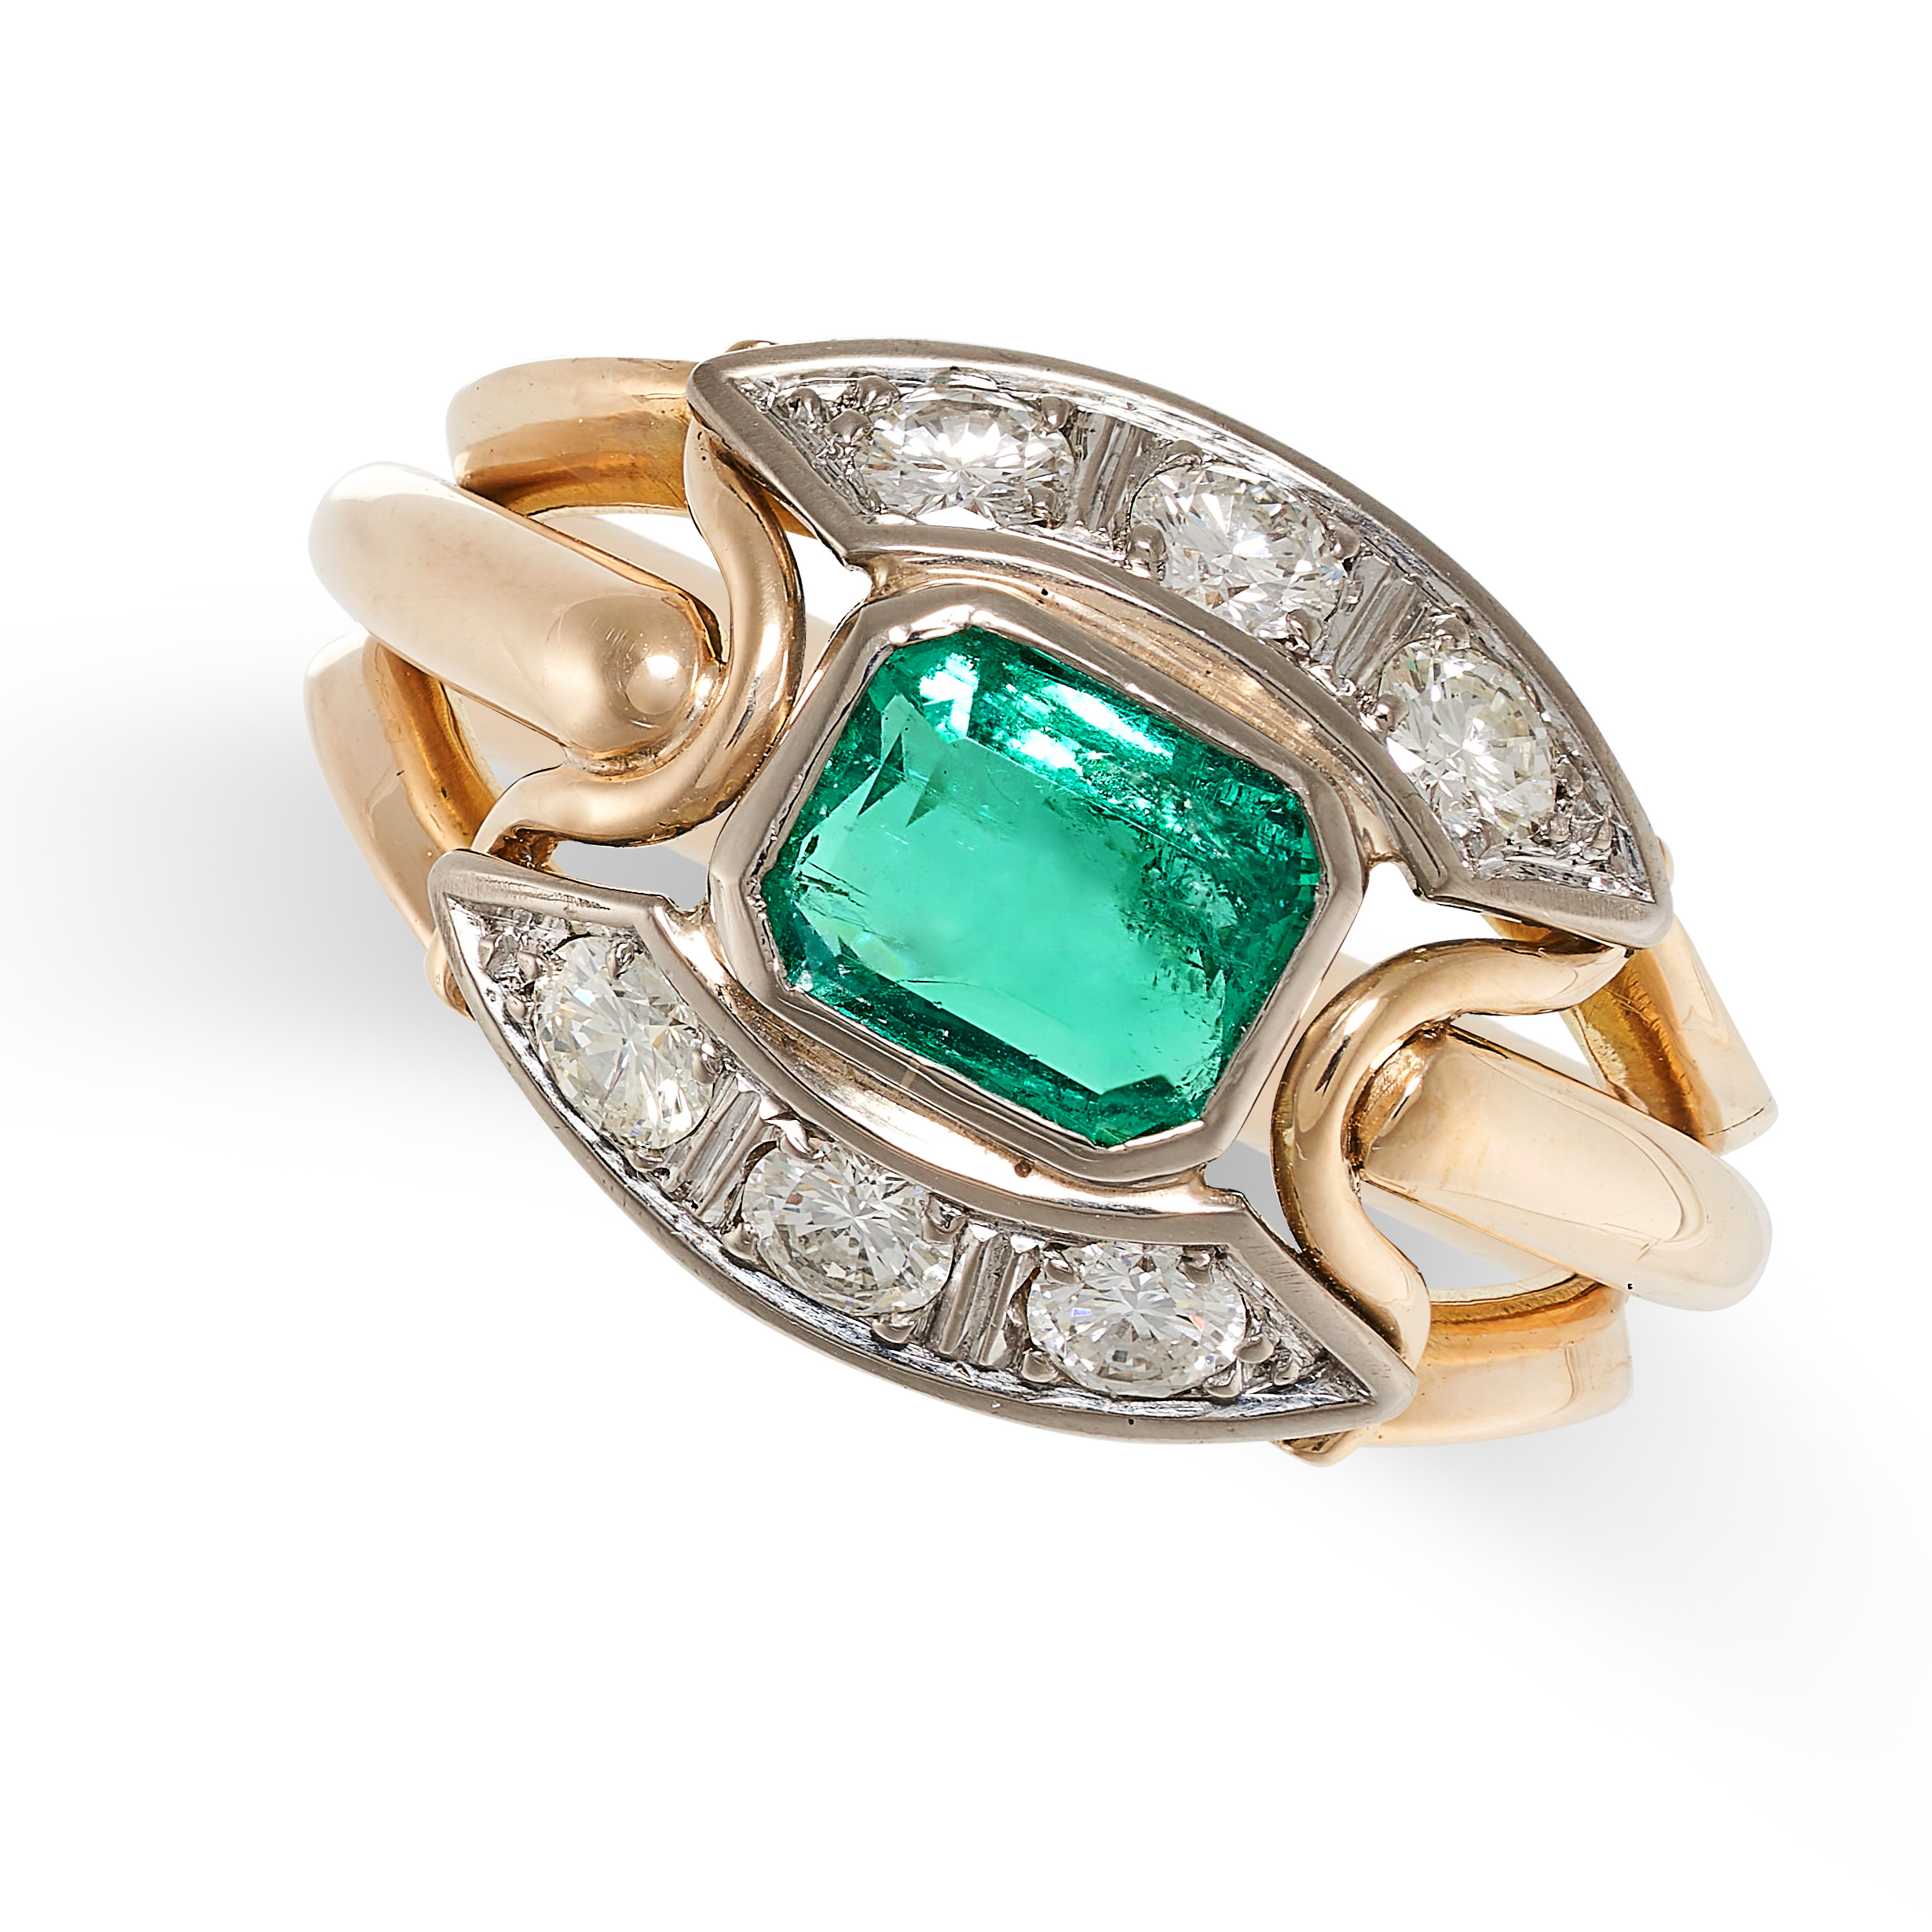 A COLOMBIAN EMERALD AND DIAMOND RING in yellow gold, set with an octagonal cut emerald of 1.63